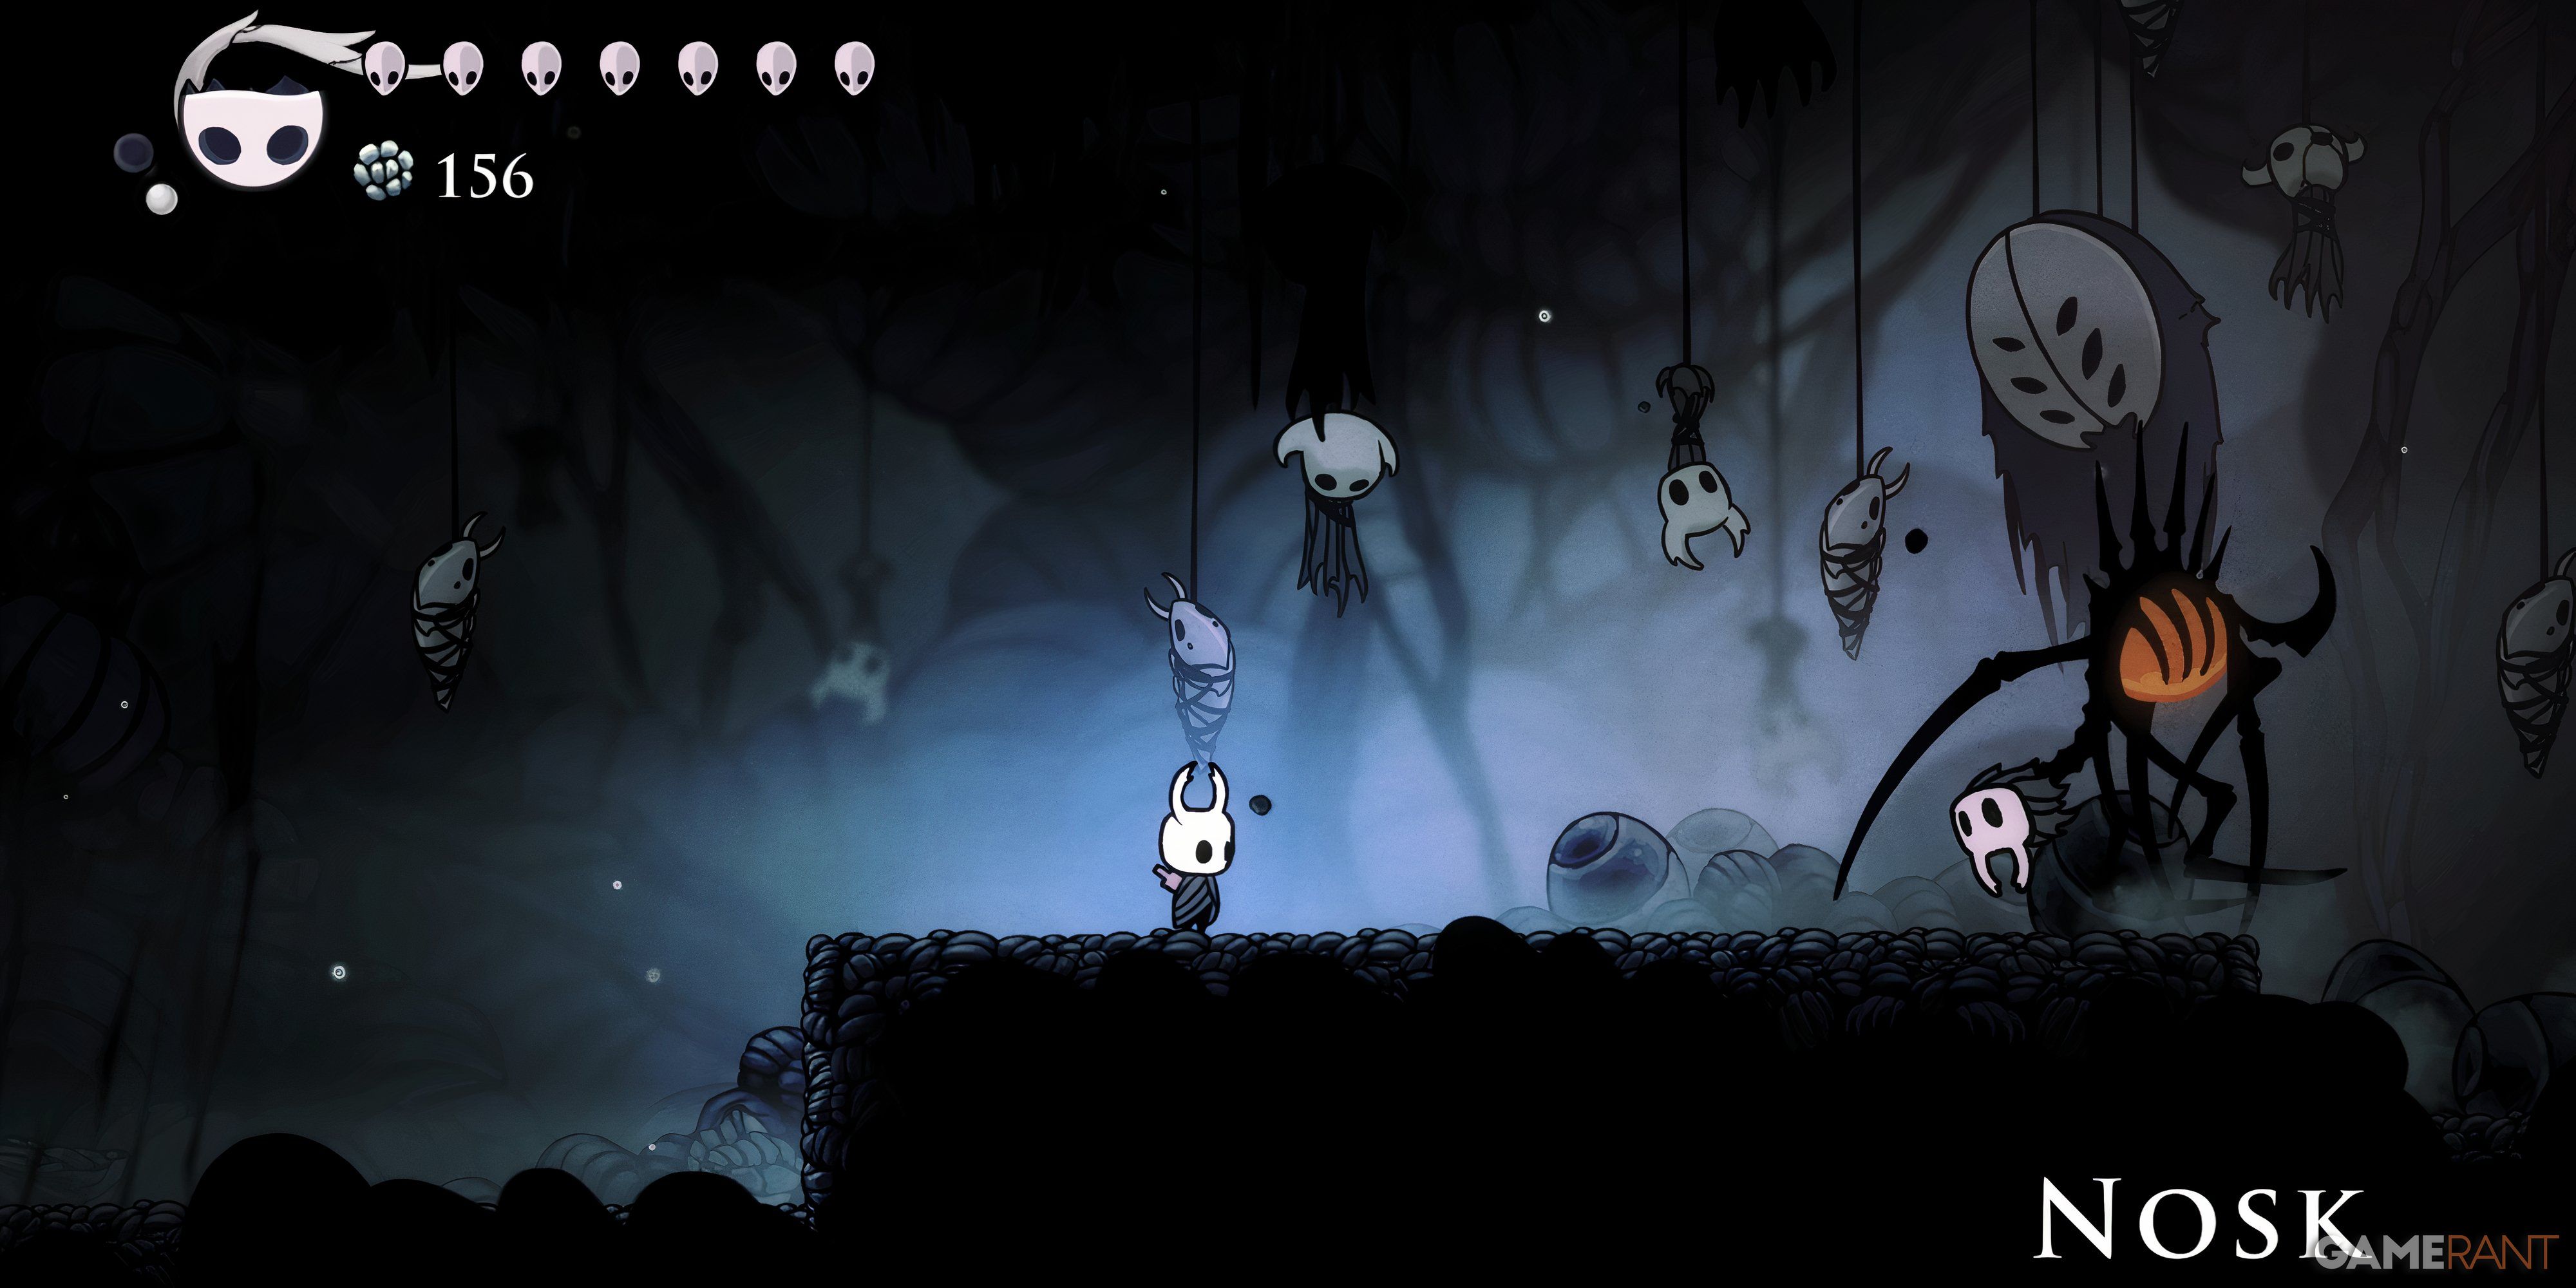 Hollow Knight: 13 Hardest Bosses, Ranked The Knight is attacked by Nosk with prey hanging from the ceiling behind